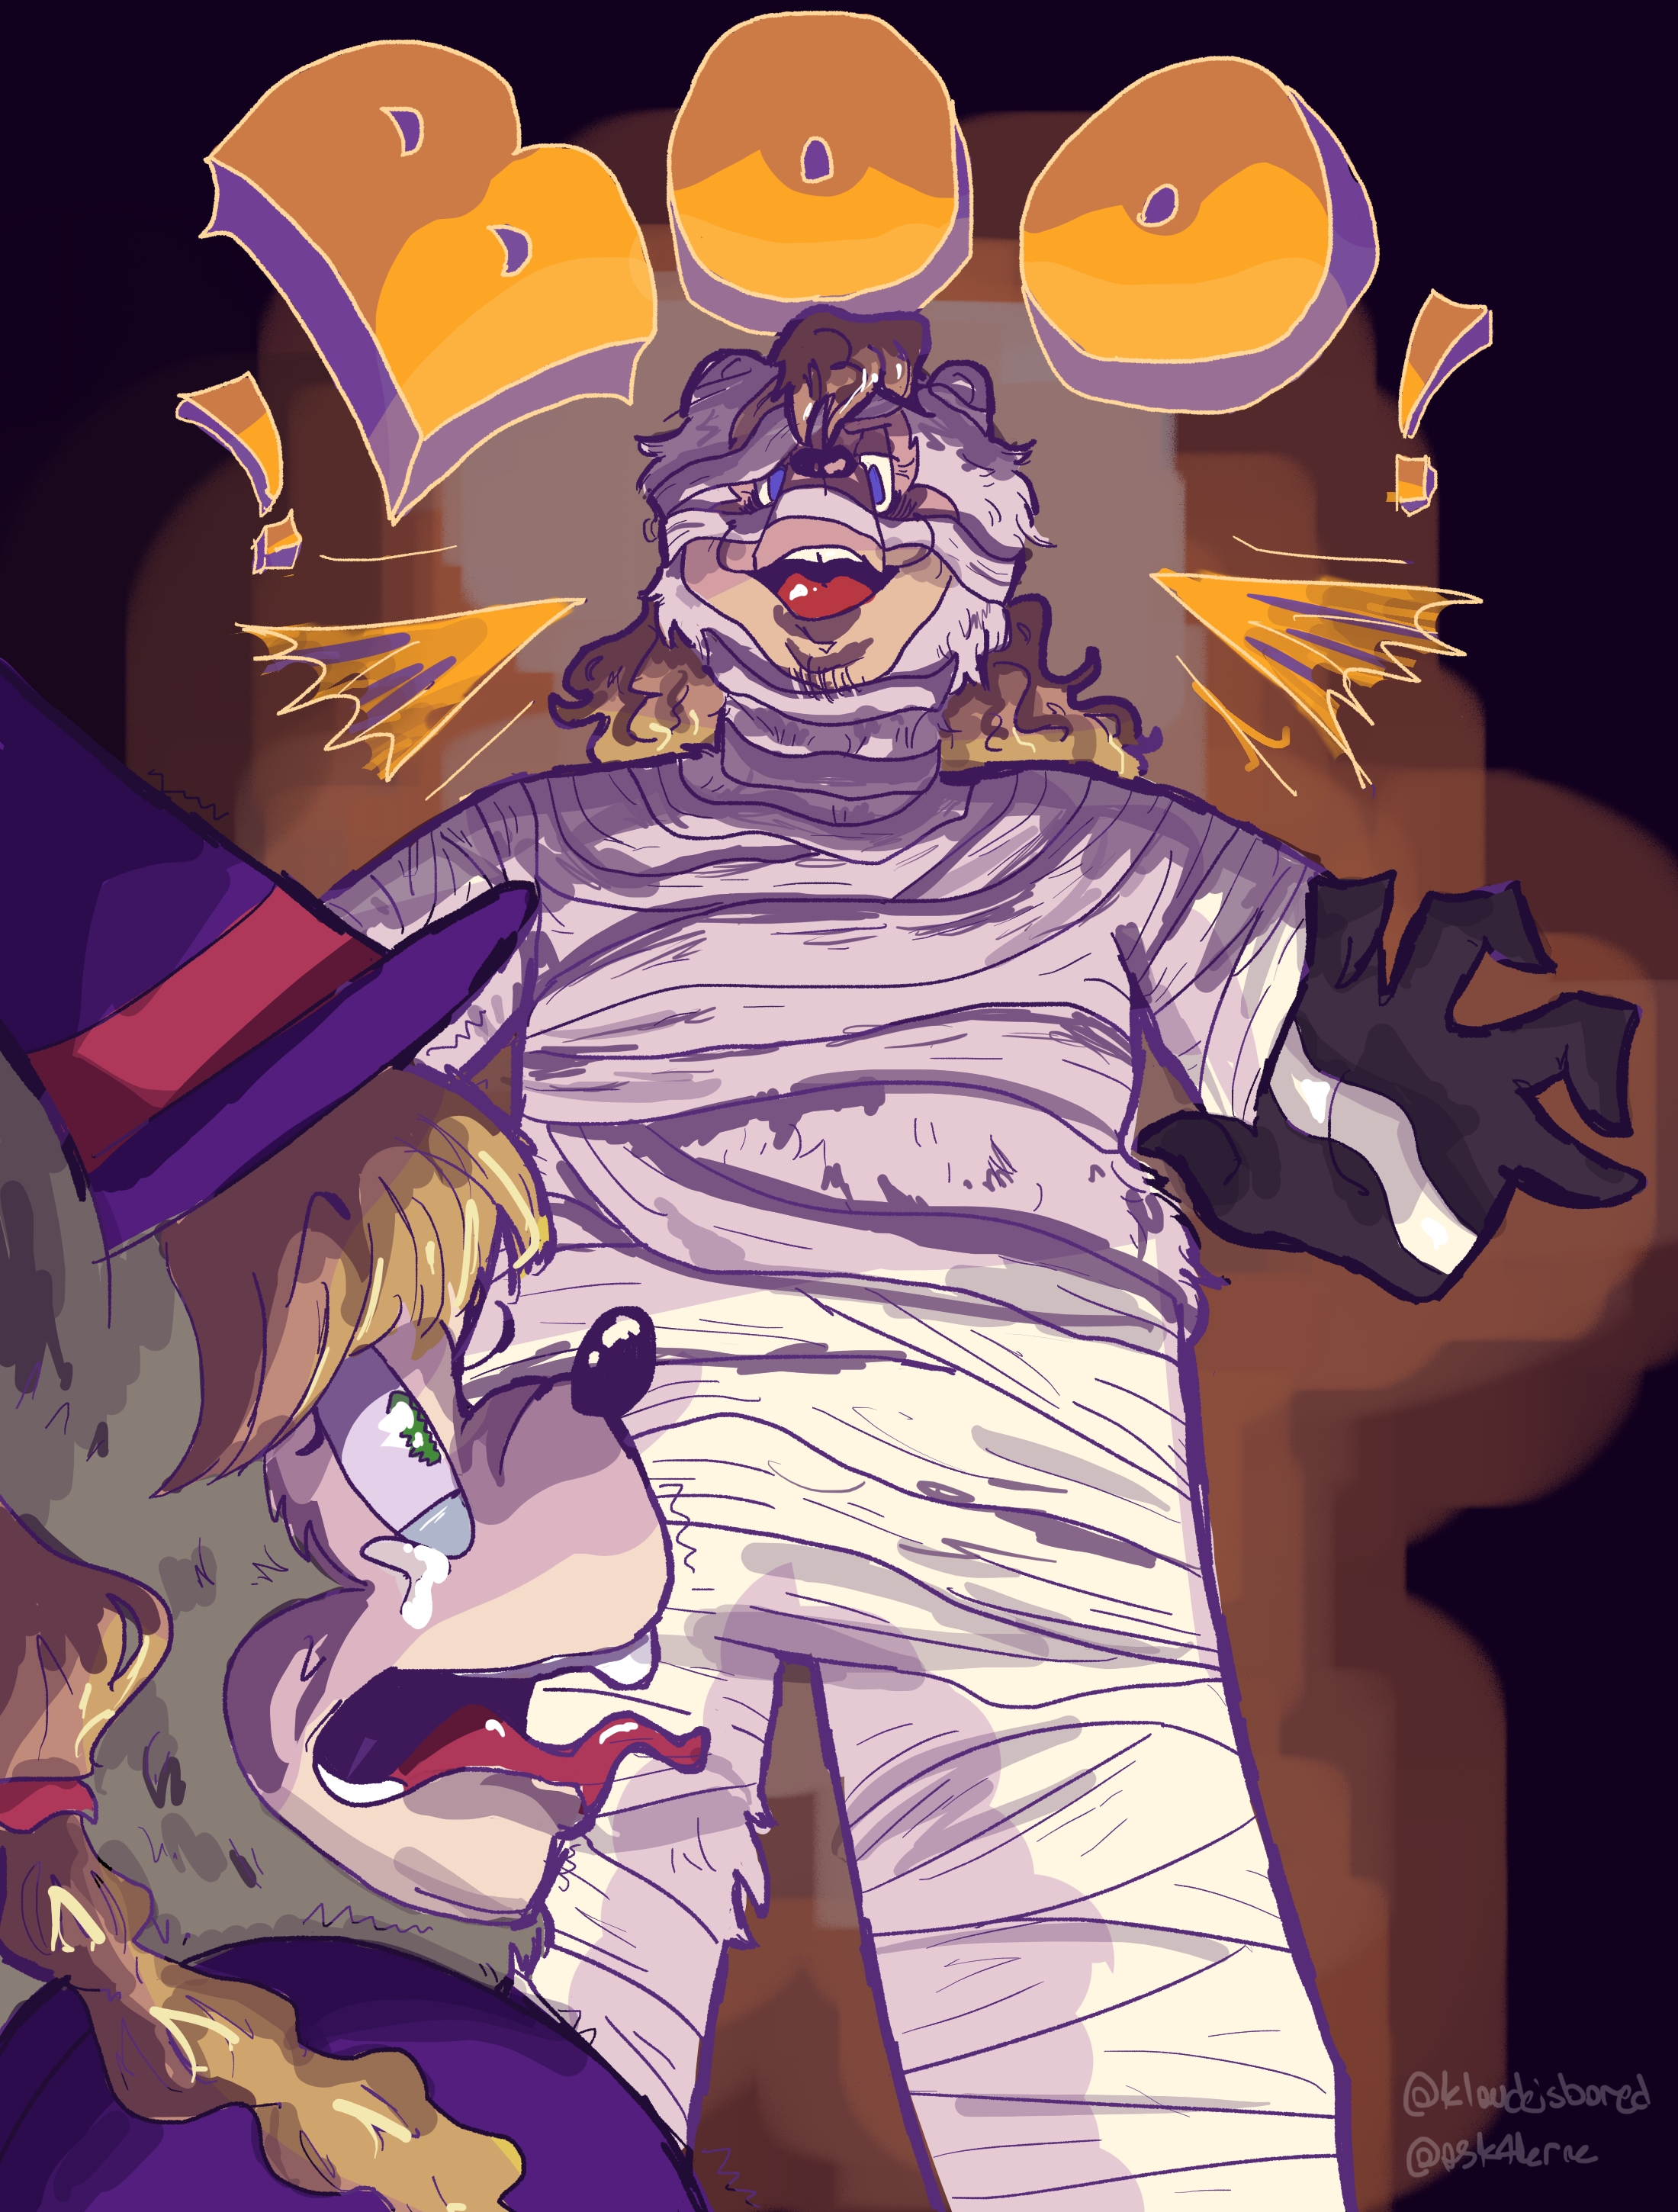 Digital art of Mitzi and Beach Bear. Beach Bear is towering over Mitzi, wearing a mummy costume and Mitzi, in a witch costume, screams. There is orange text above them saying 'BOO!'